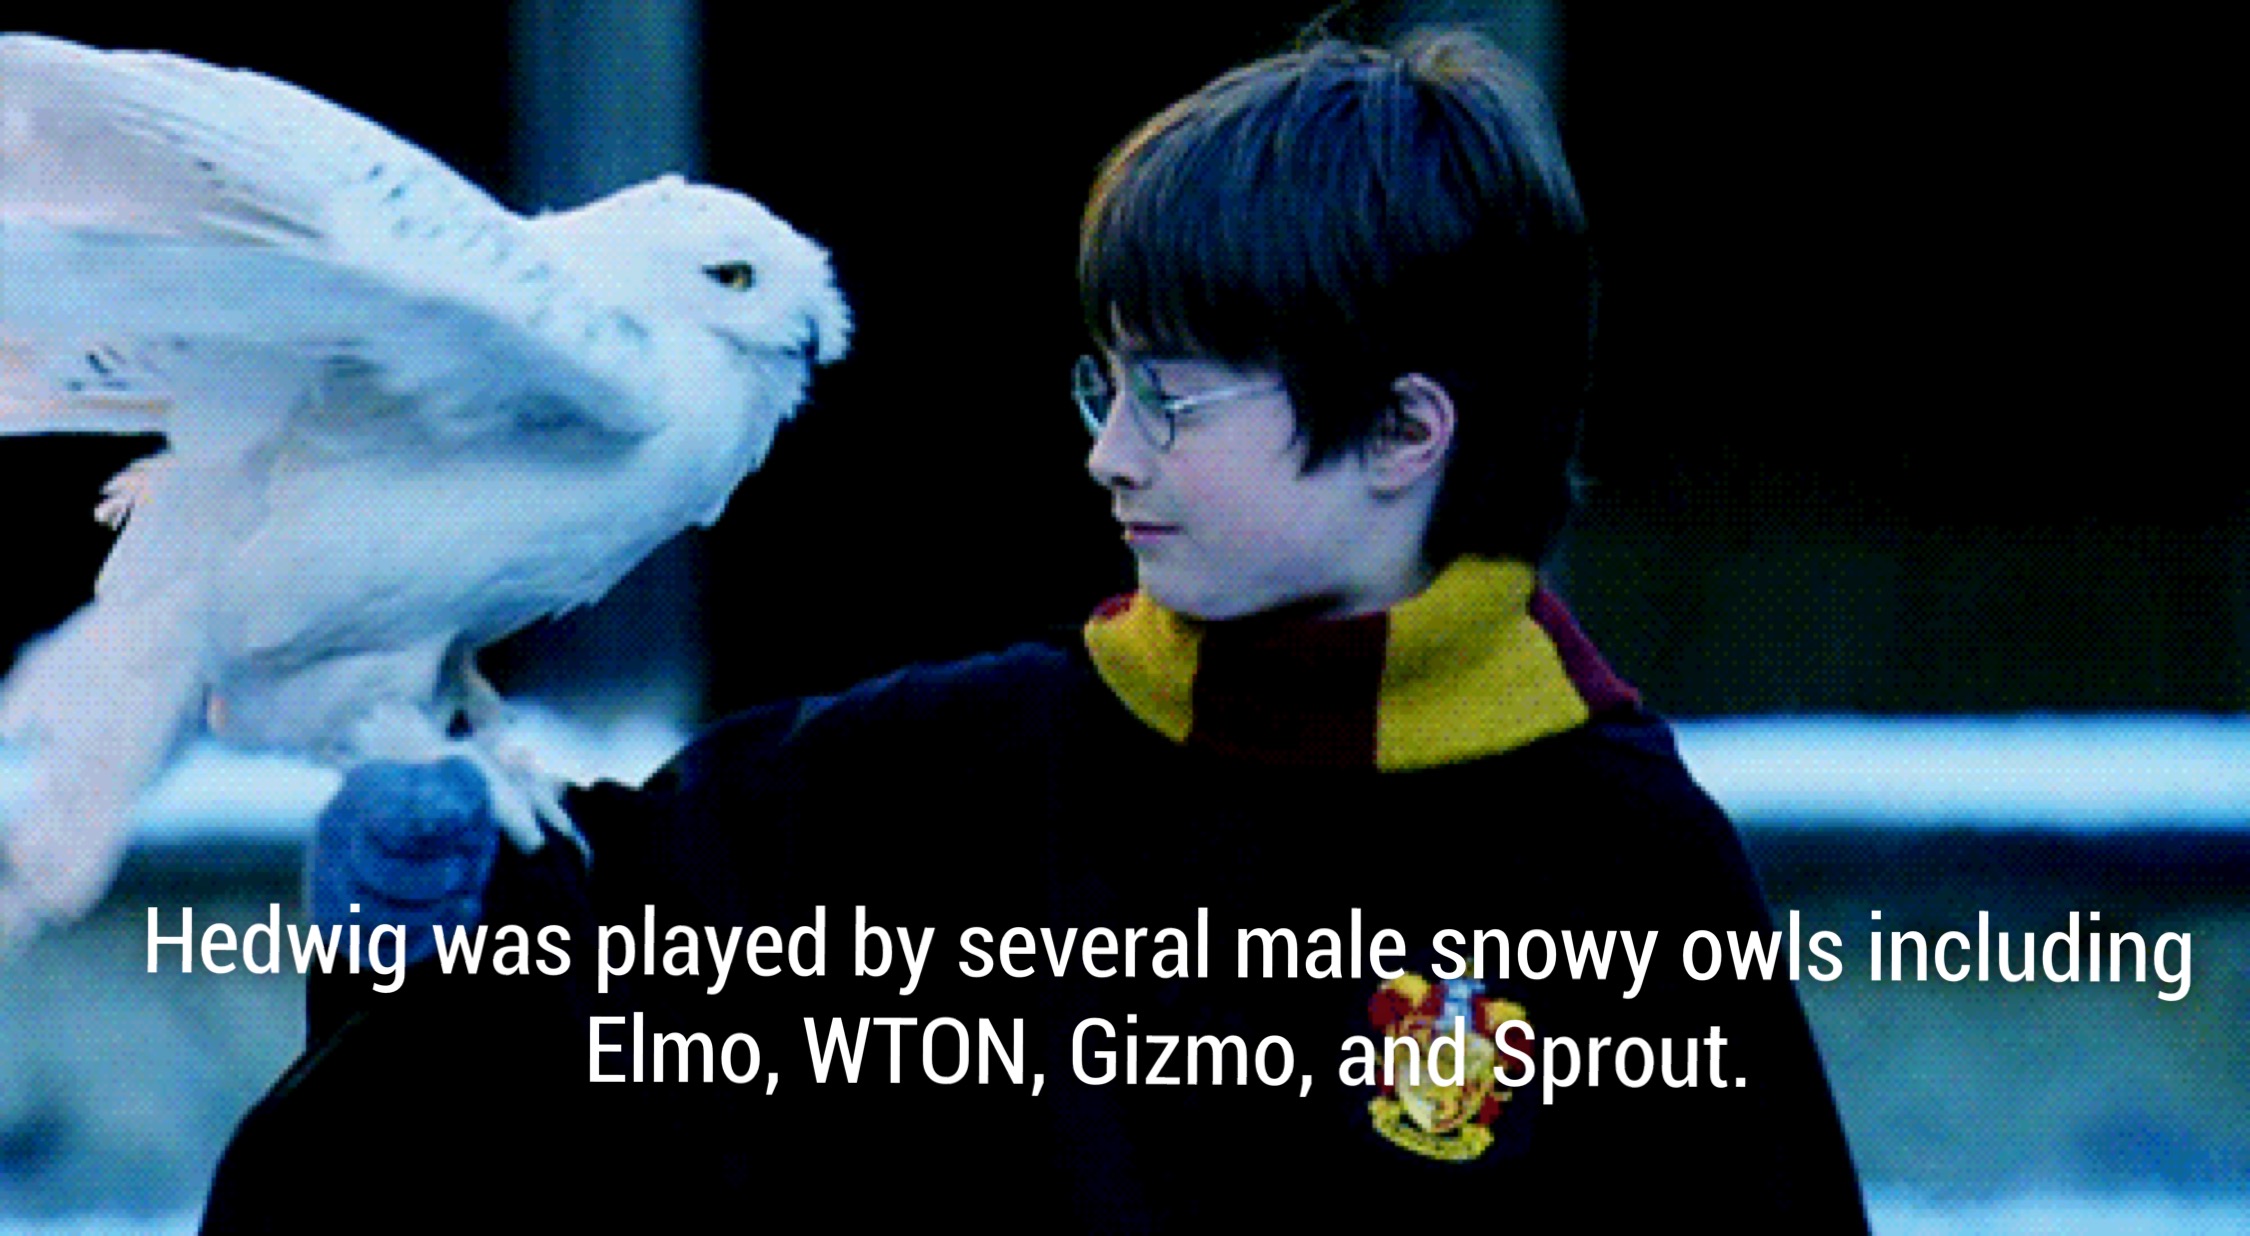 harry potter and the sorcerer's stone hedwig - Hedwig was played by several male snowy owls including Elmo, Wton, Gizmo, and Sprout.